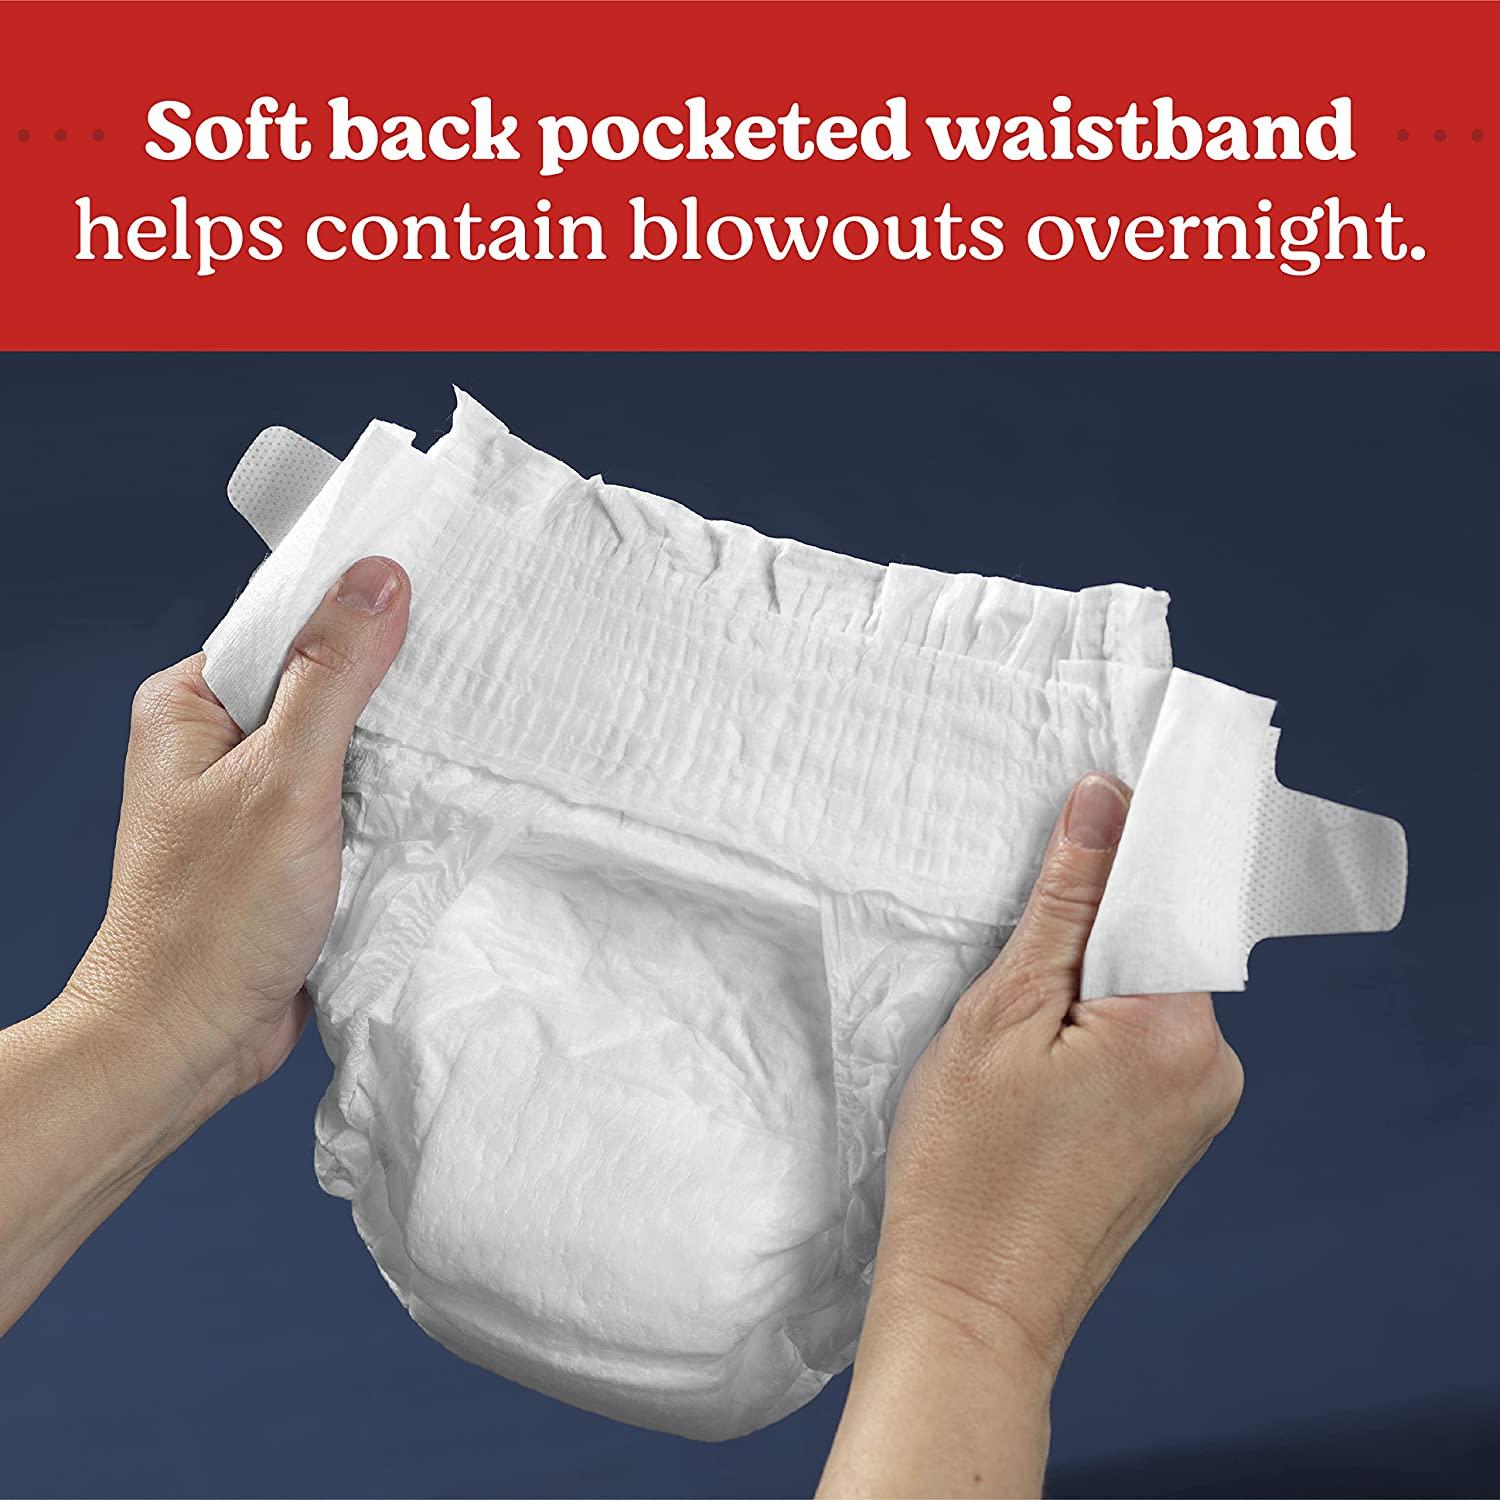 Overnight Baby Diapers - Size 5 (27-35 lbs)